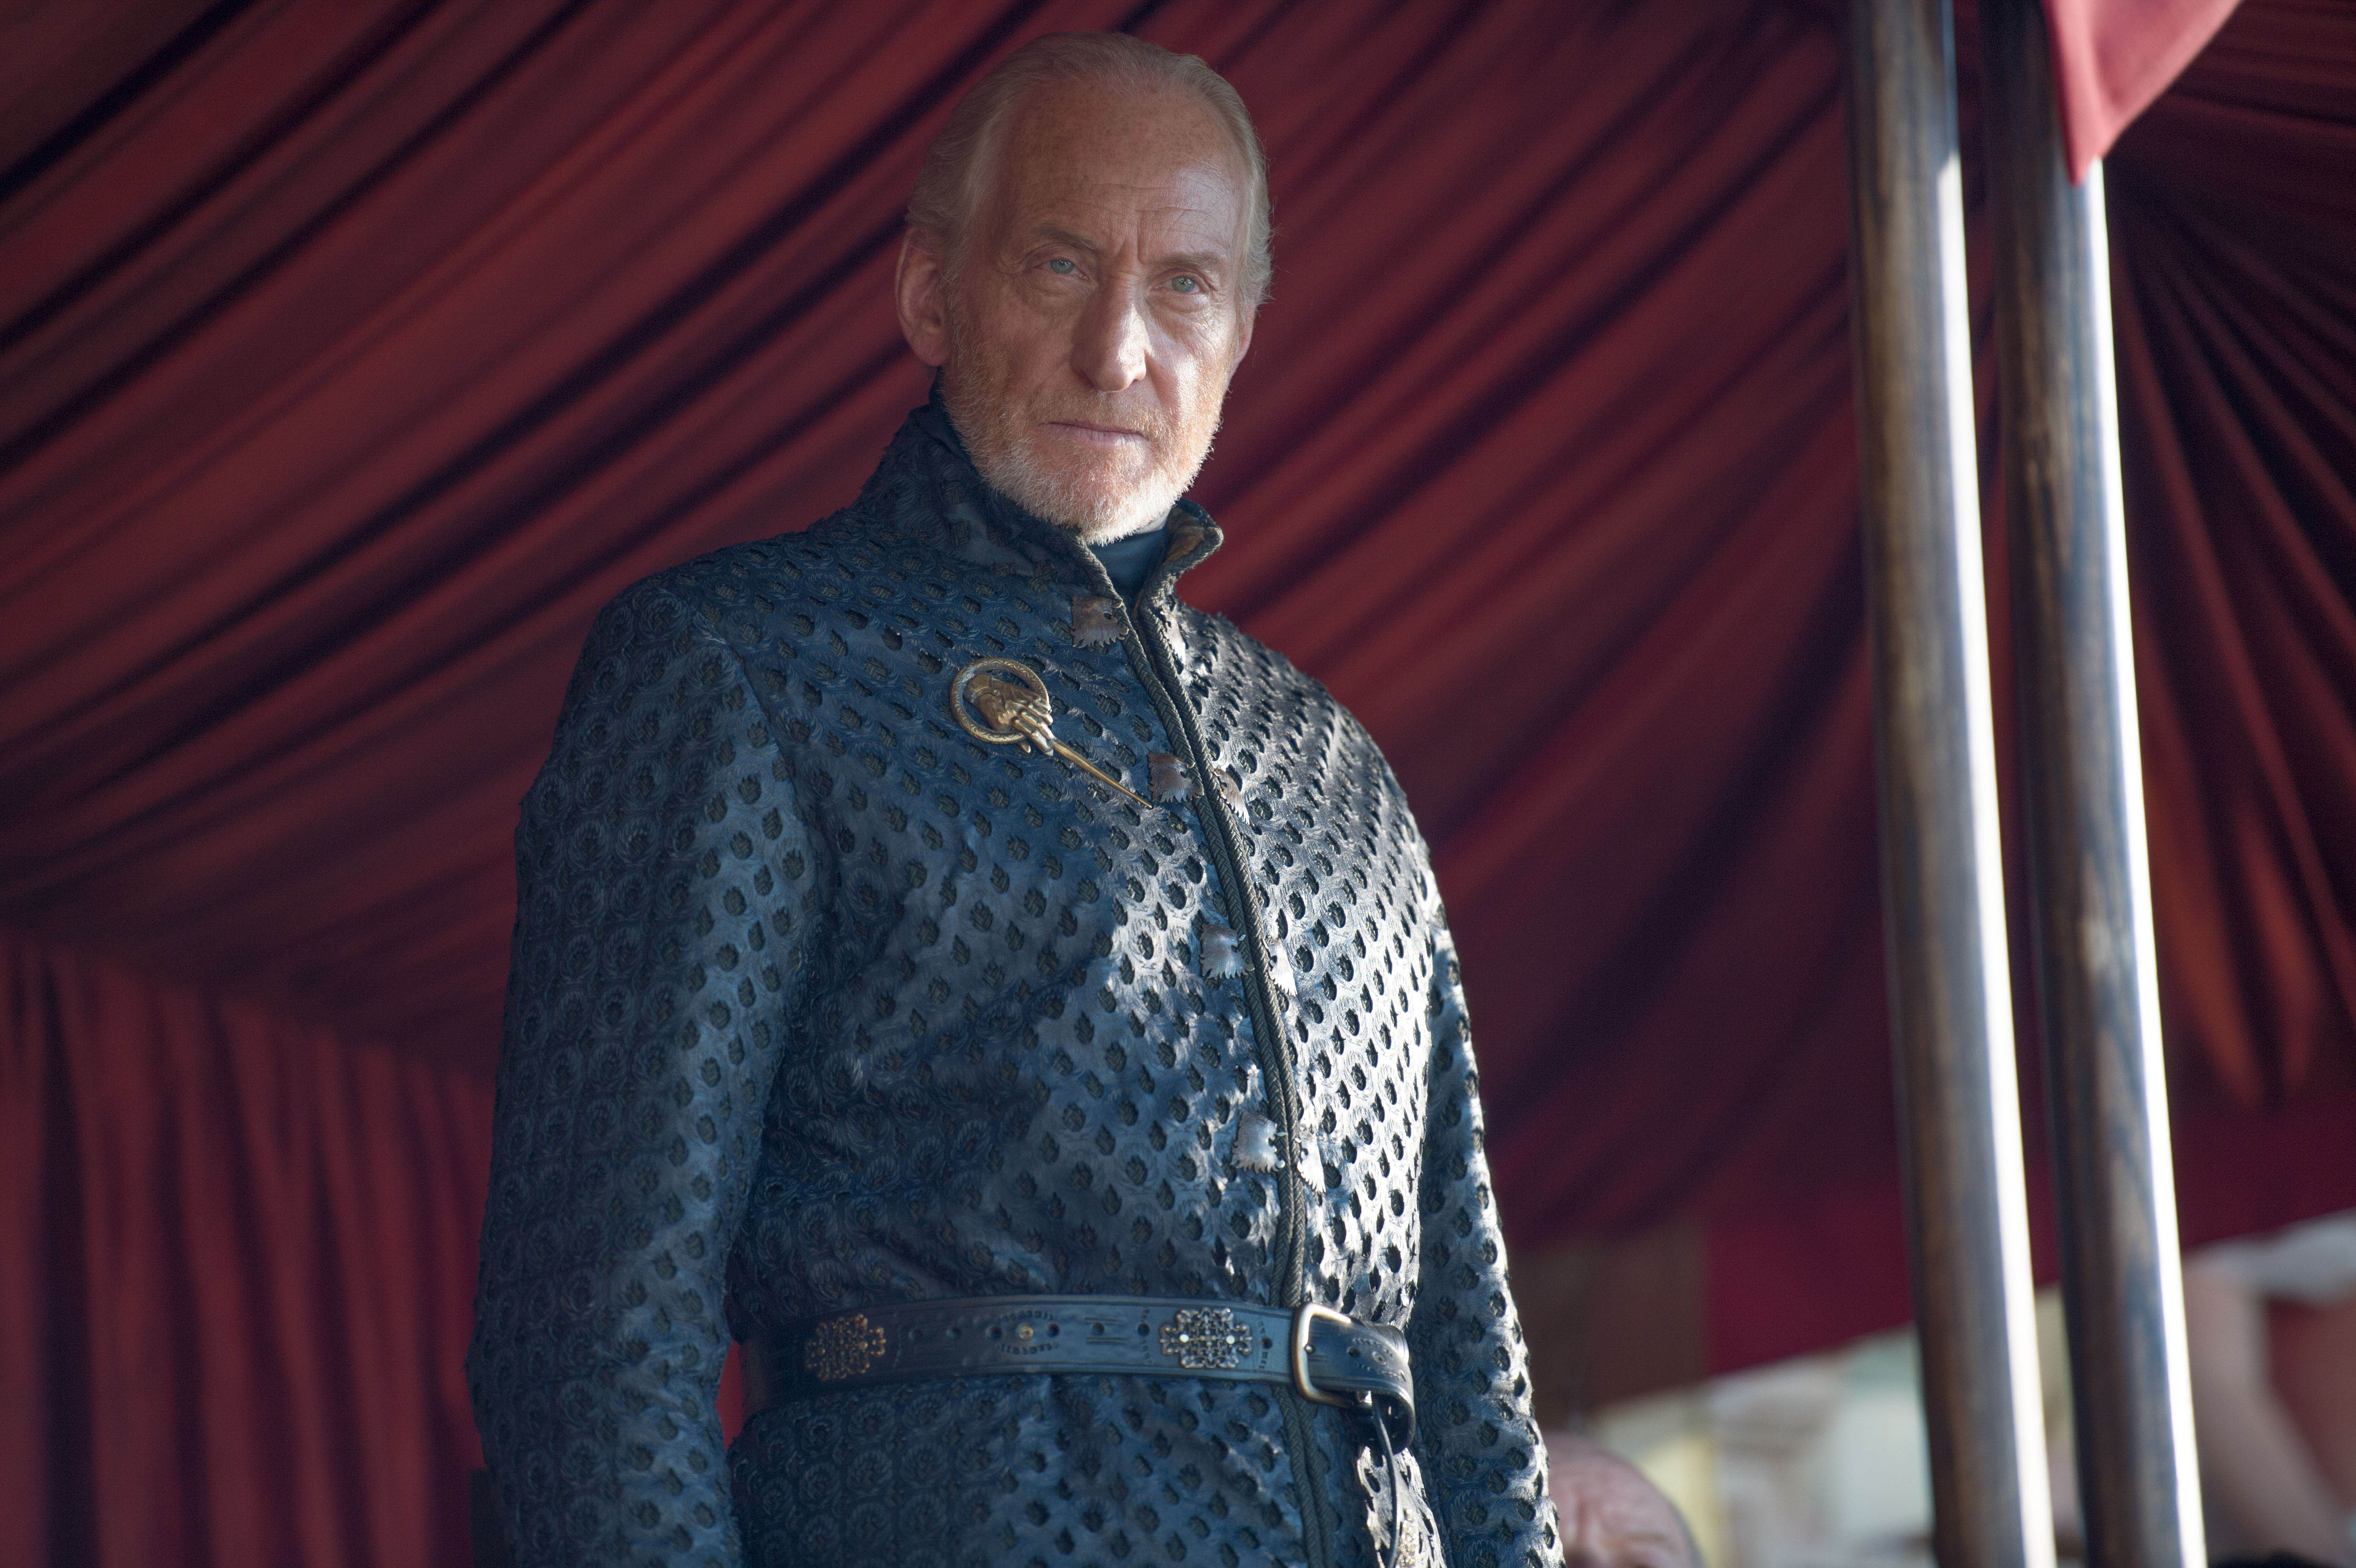 PC Wallpapers tv show, game of thrones, charles dance, tywin lannister